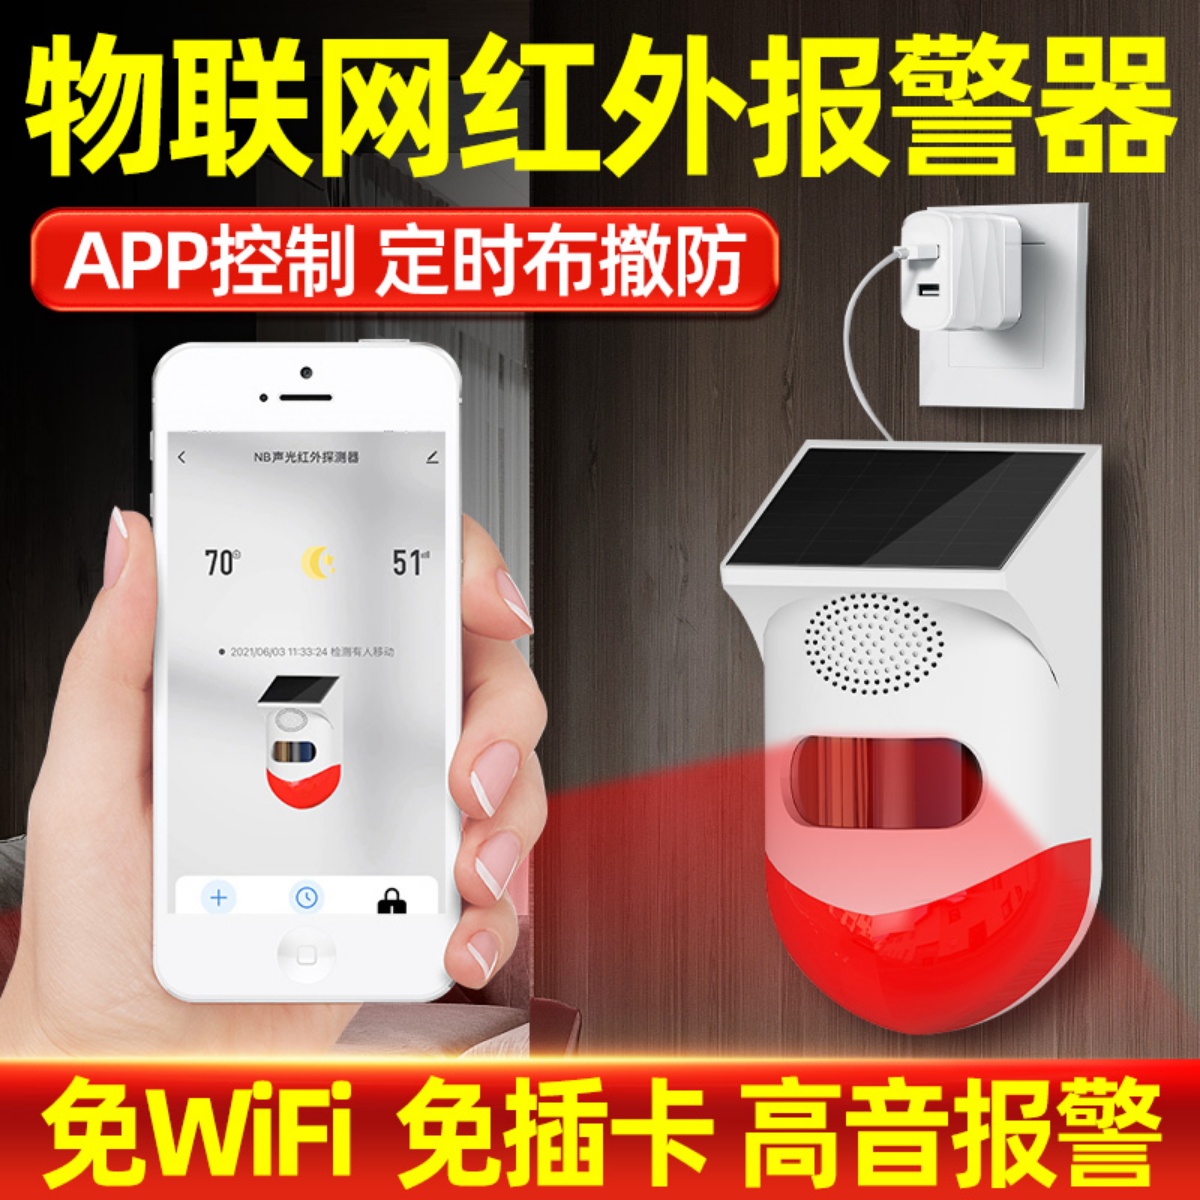 Anti-theft alarm outdoor remote connected mobile phone smart indoor shop home infrared body sensor monitoring